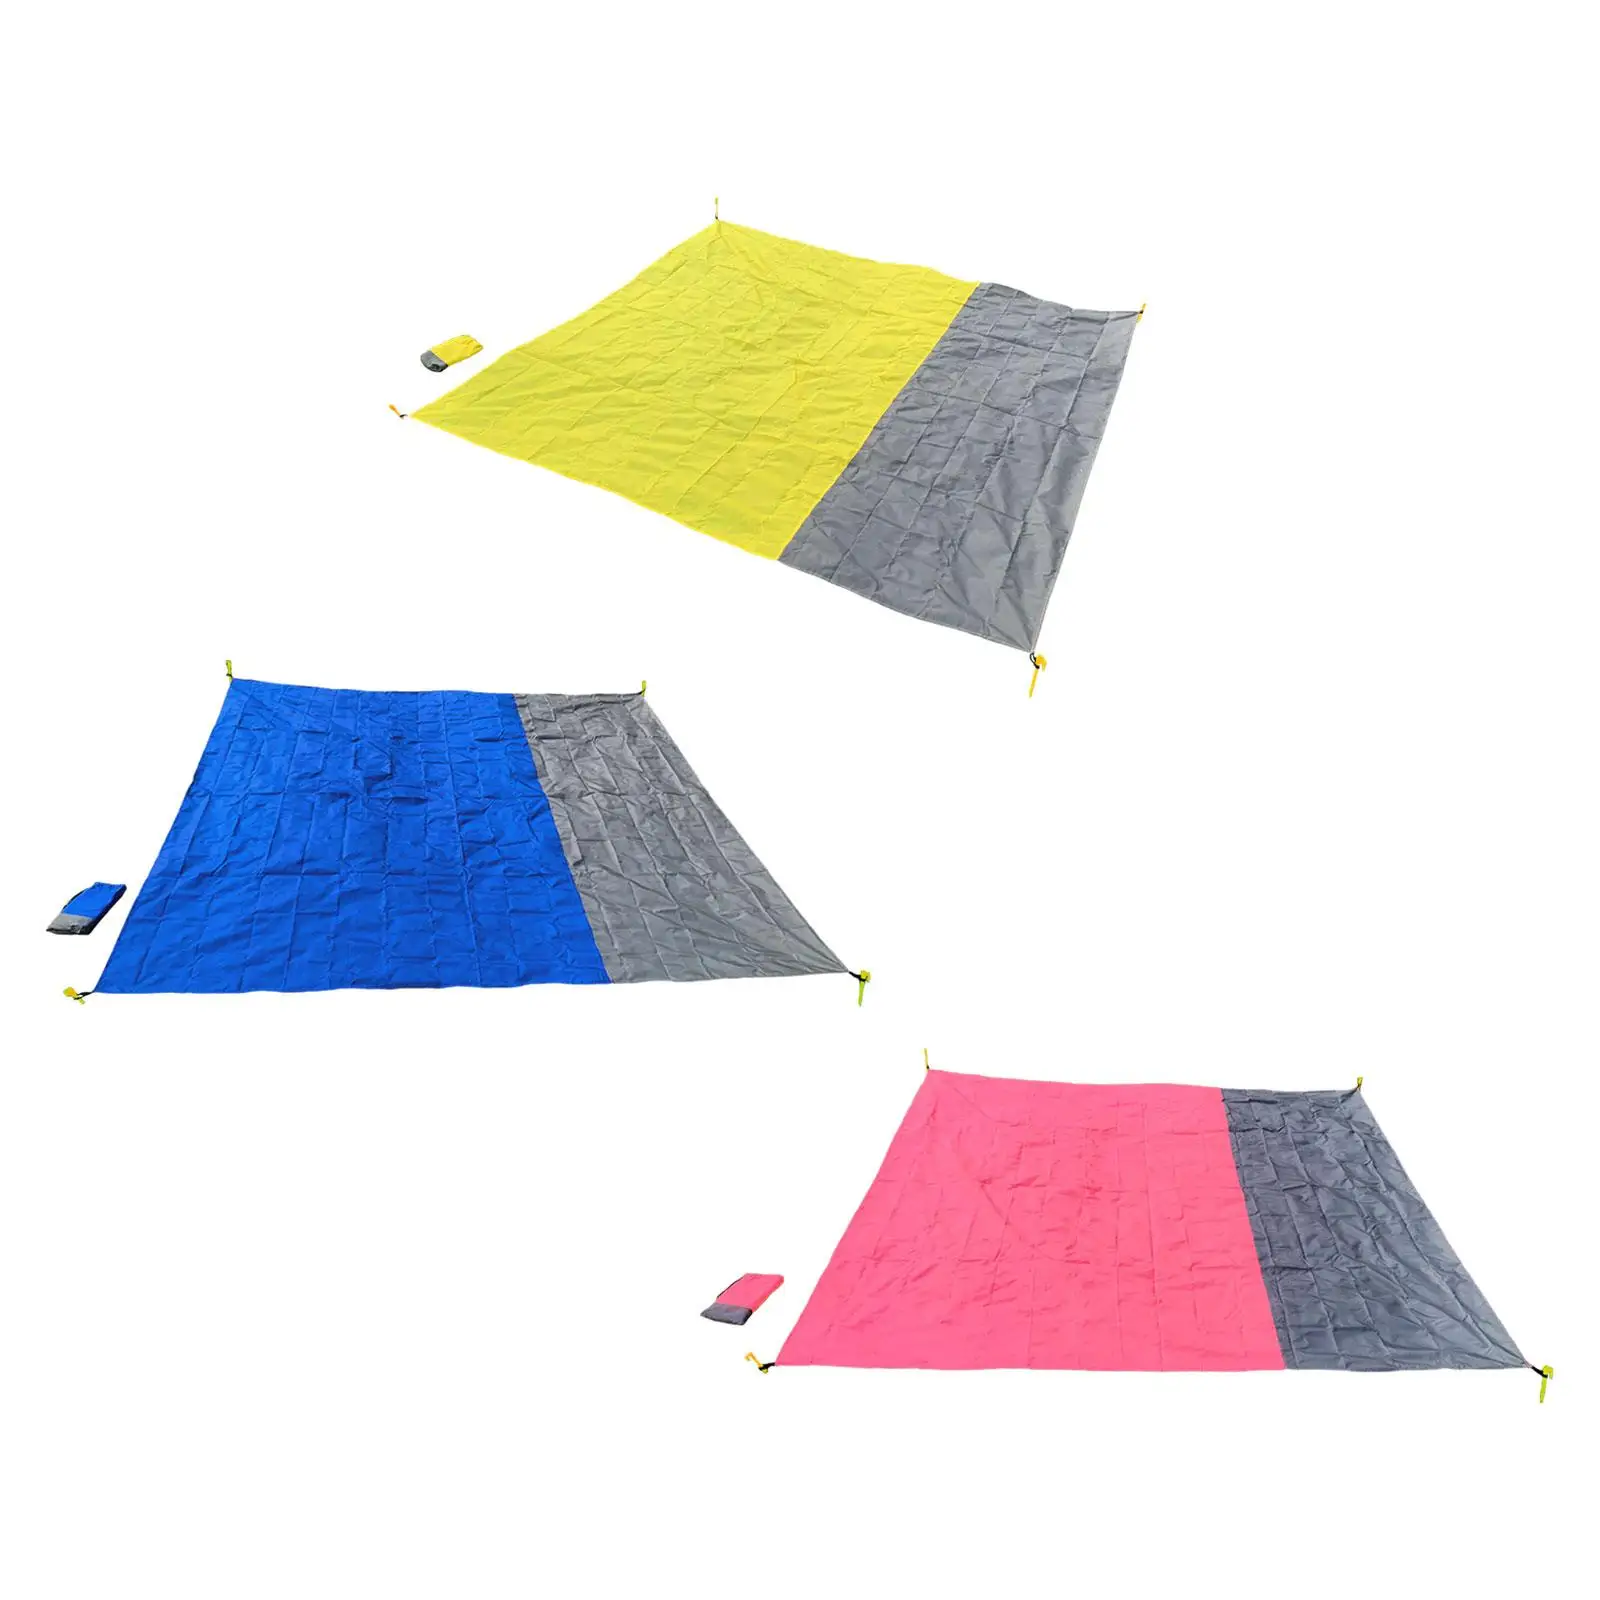 Picnic Blanket Foldable Waterproof Lightweight Beach Blanket Accessories for Backpacking Playground Hiking Festival Camping